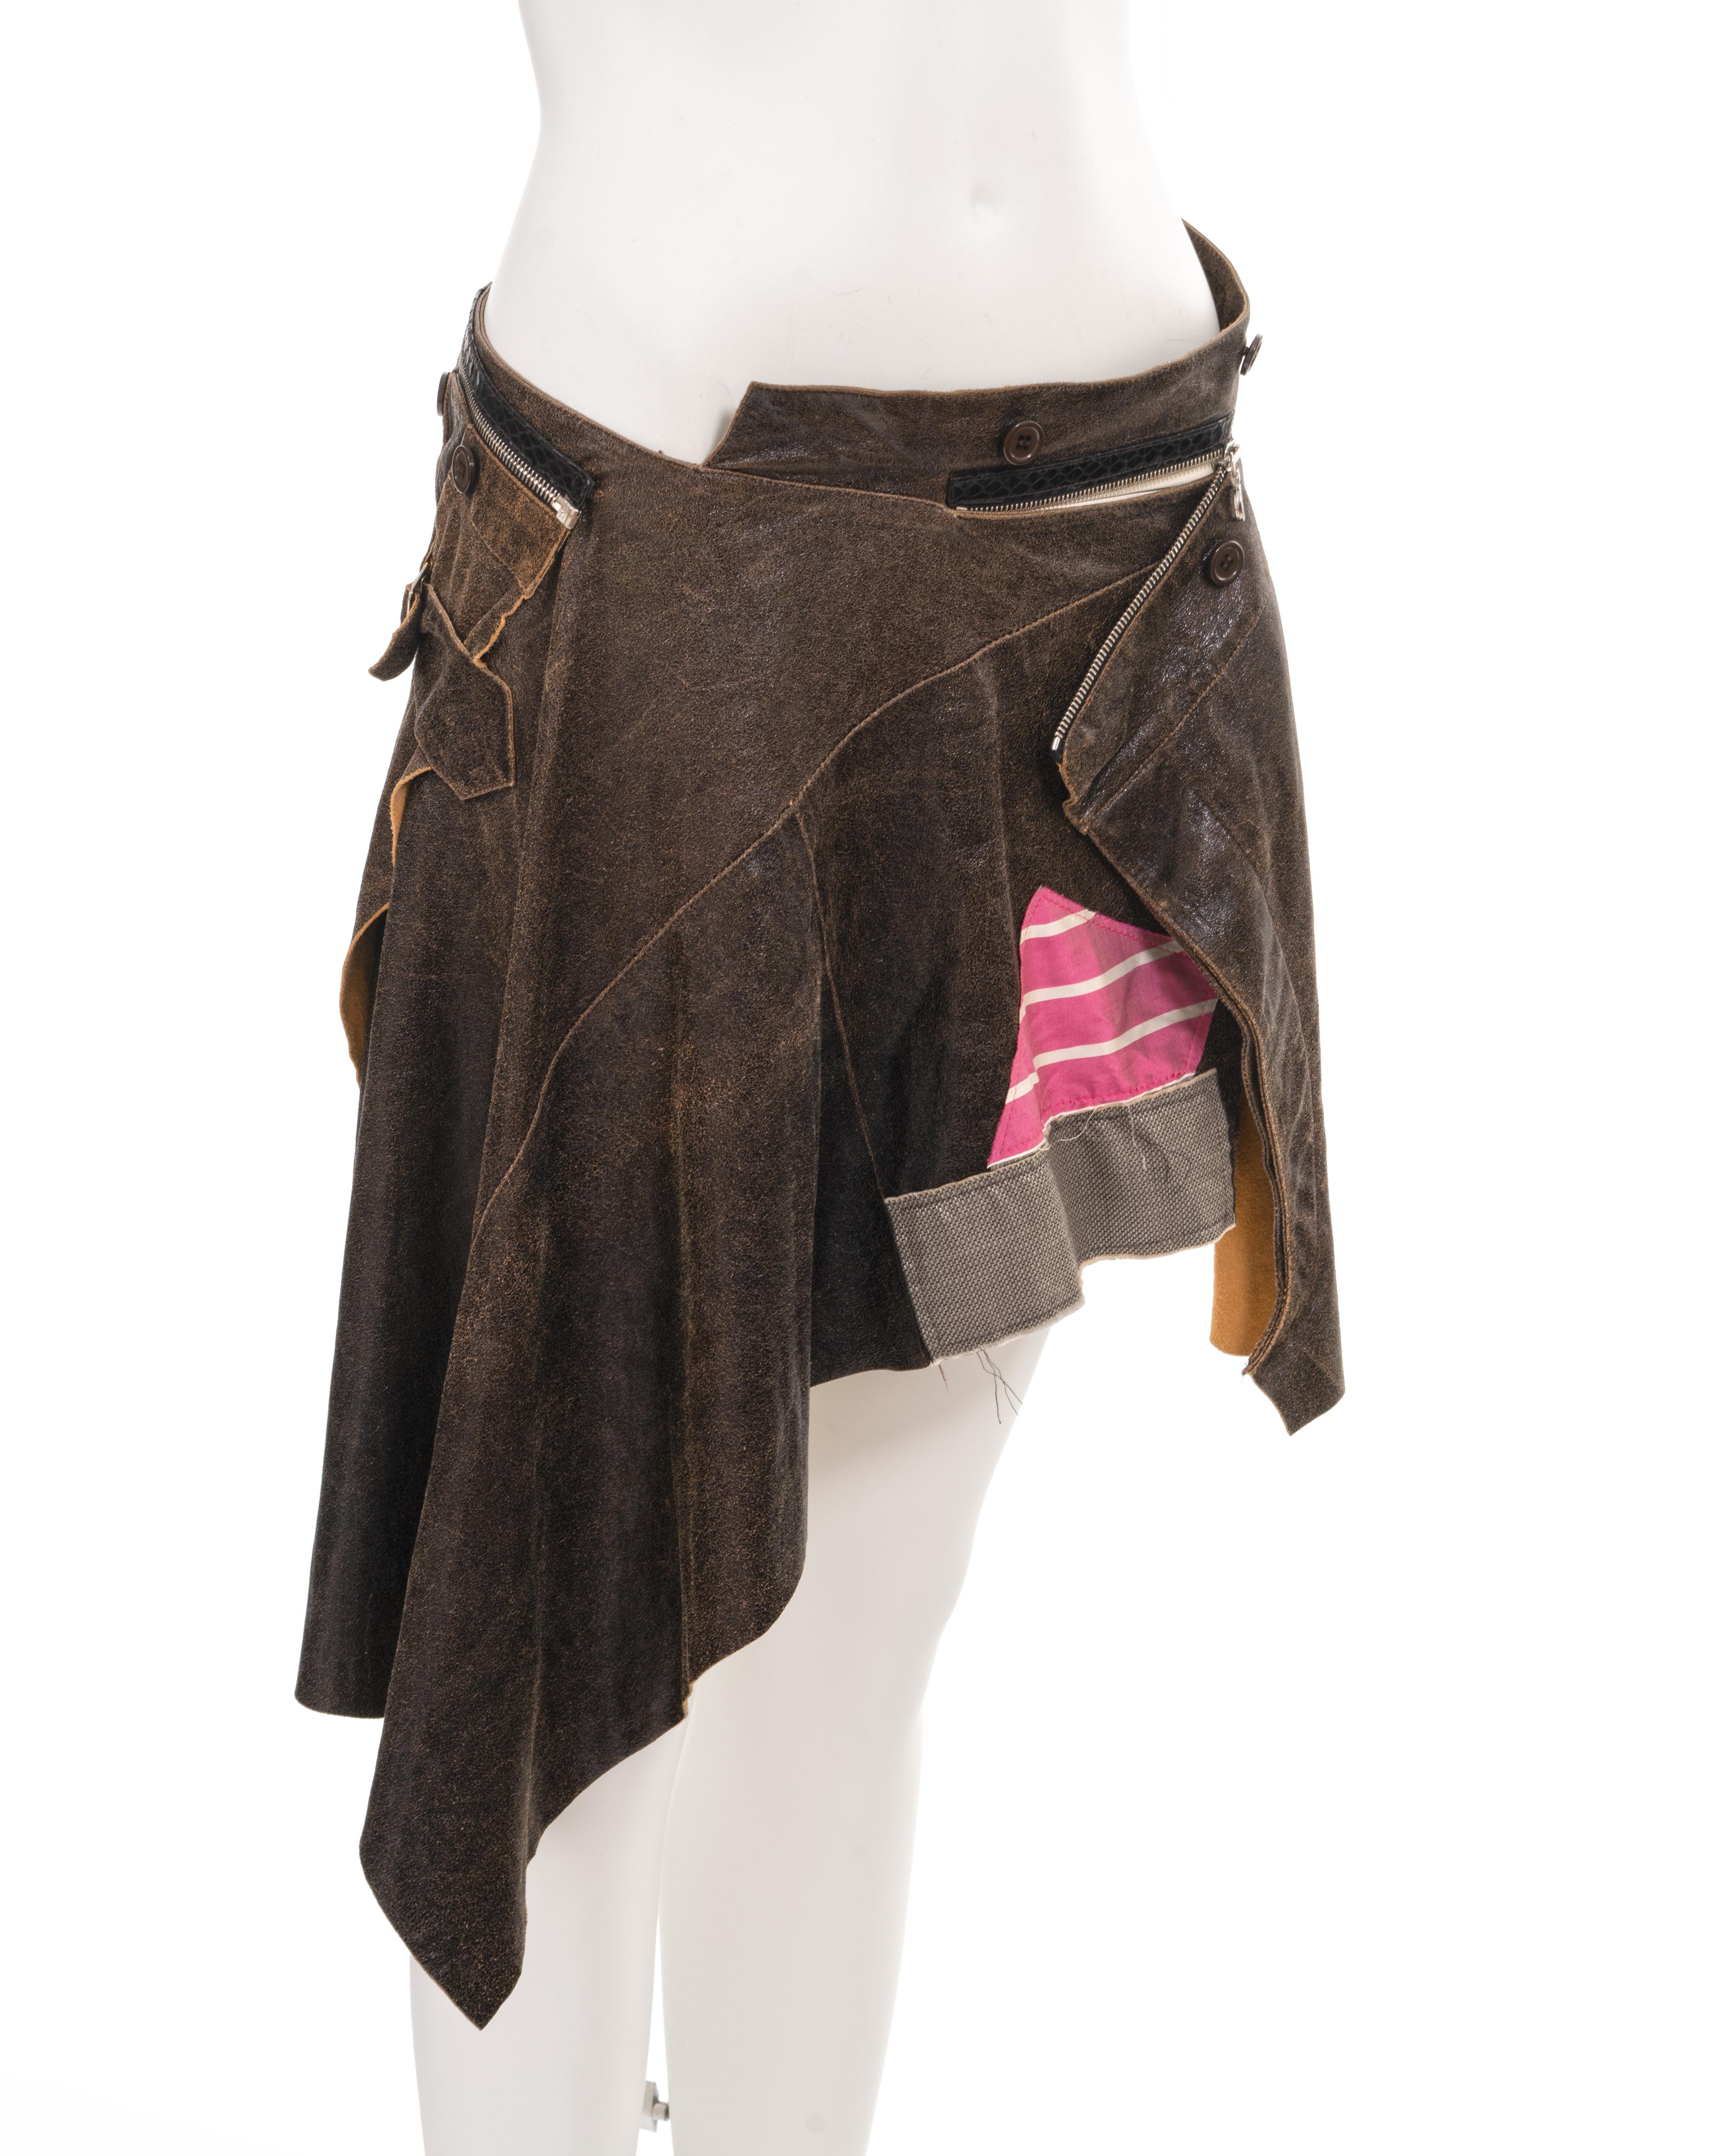 Christian Dior by John Galliano deconstructed brown leather wrap skirt, ss 2001 For Sale 8